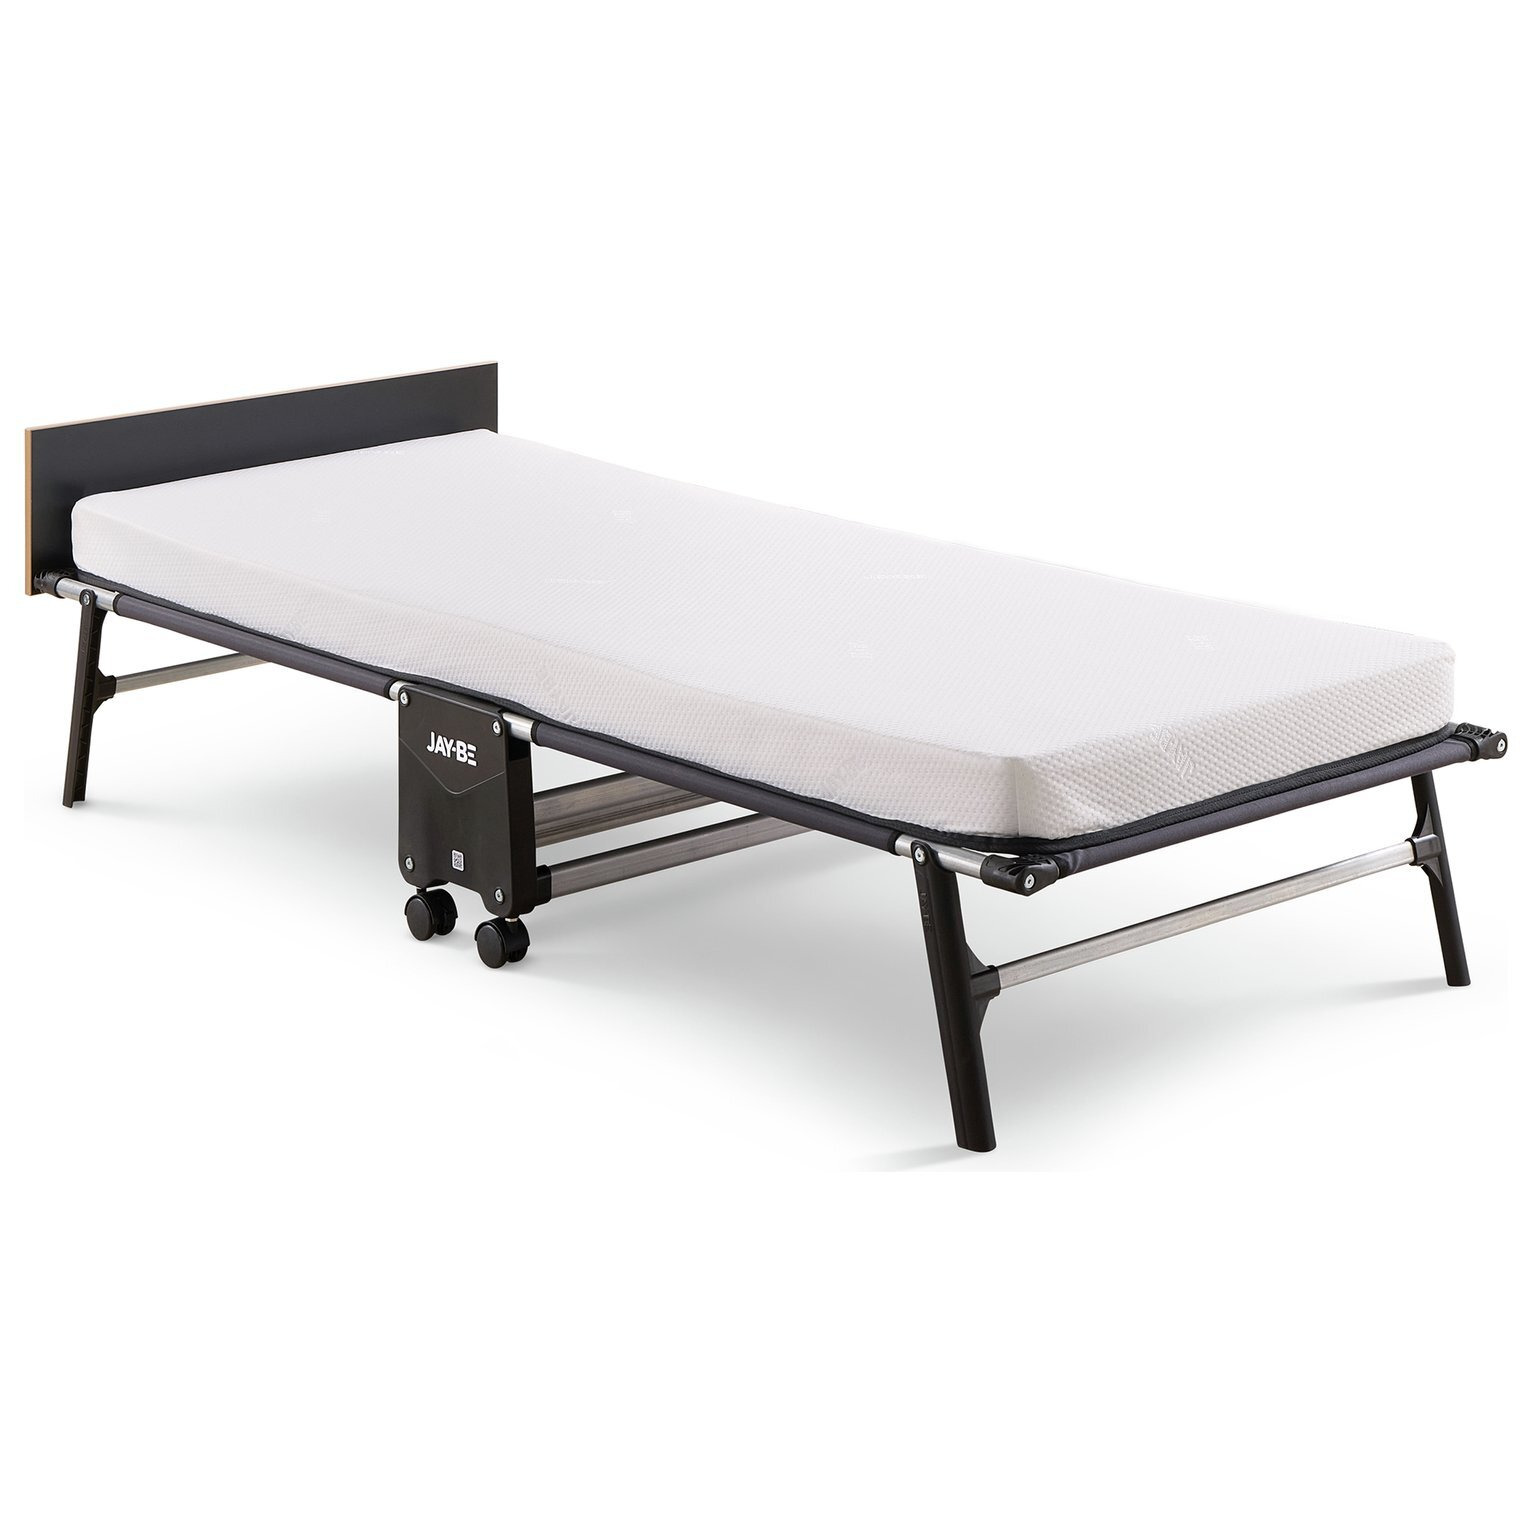 Jay-Be Rollaway Folding Bed with Memory Mattress - Single - image 1